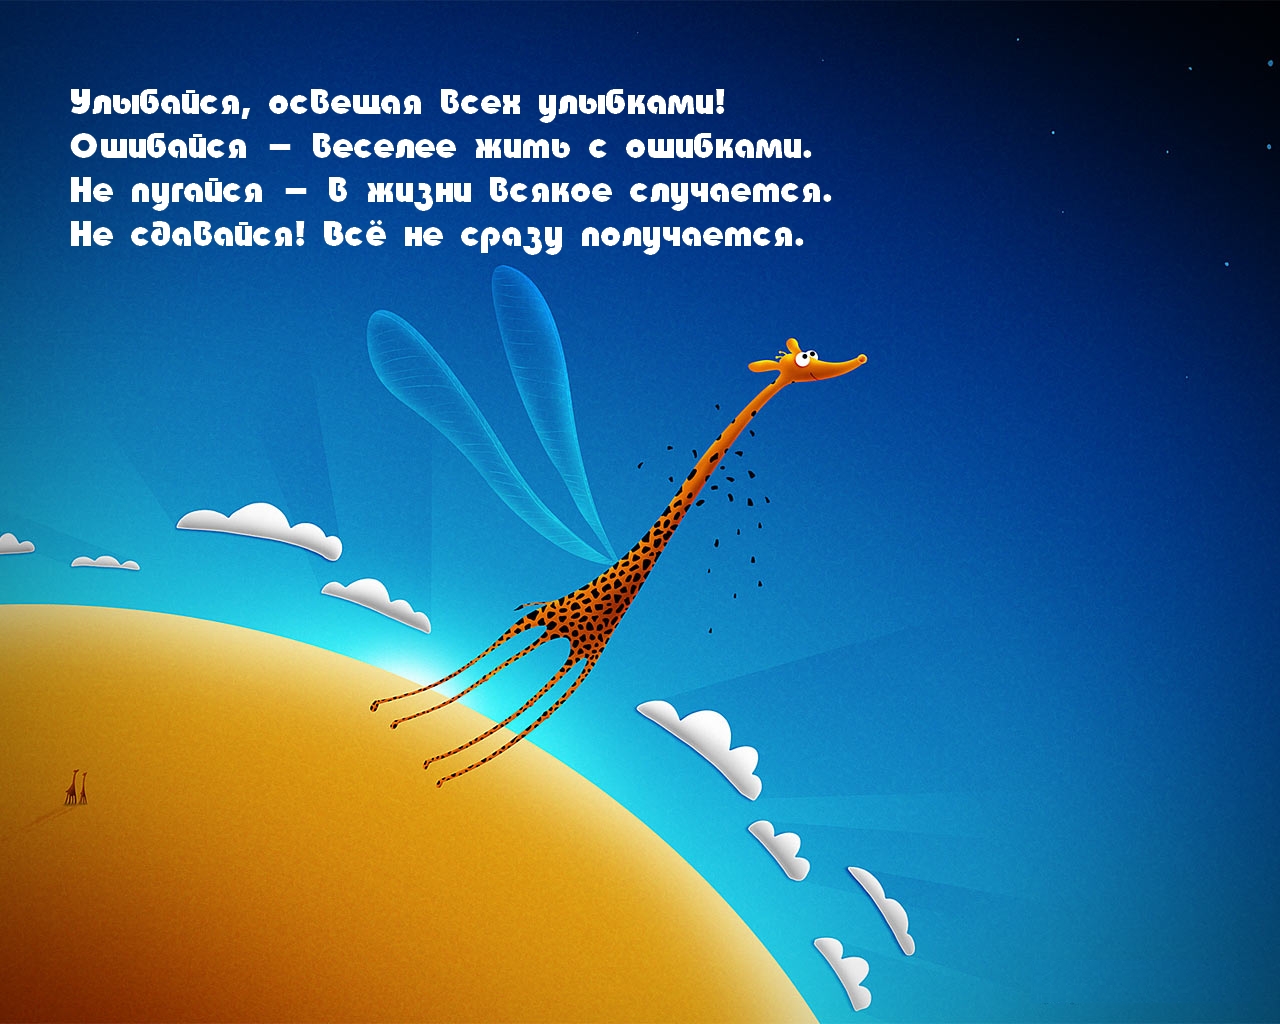 Файл:Learning-to-fly-wallpapers 9143 1280x1024.jpg